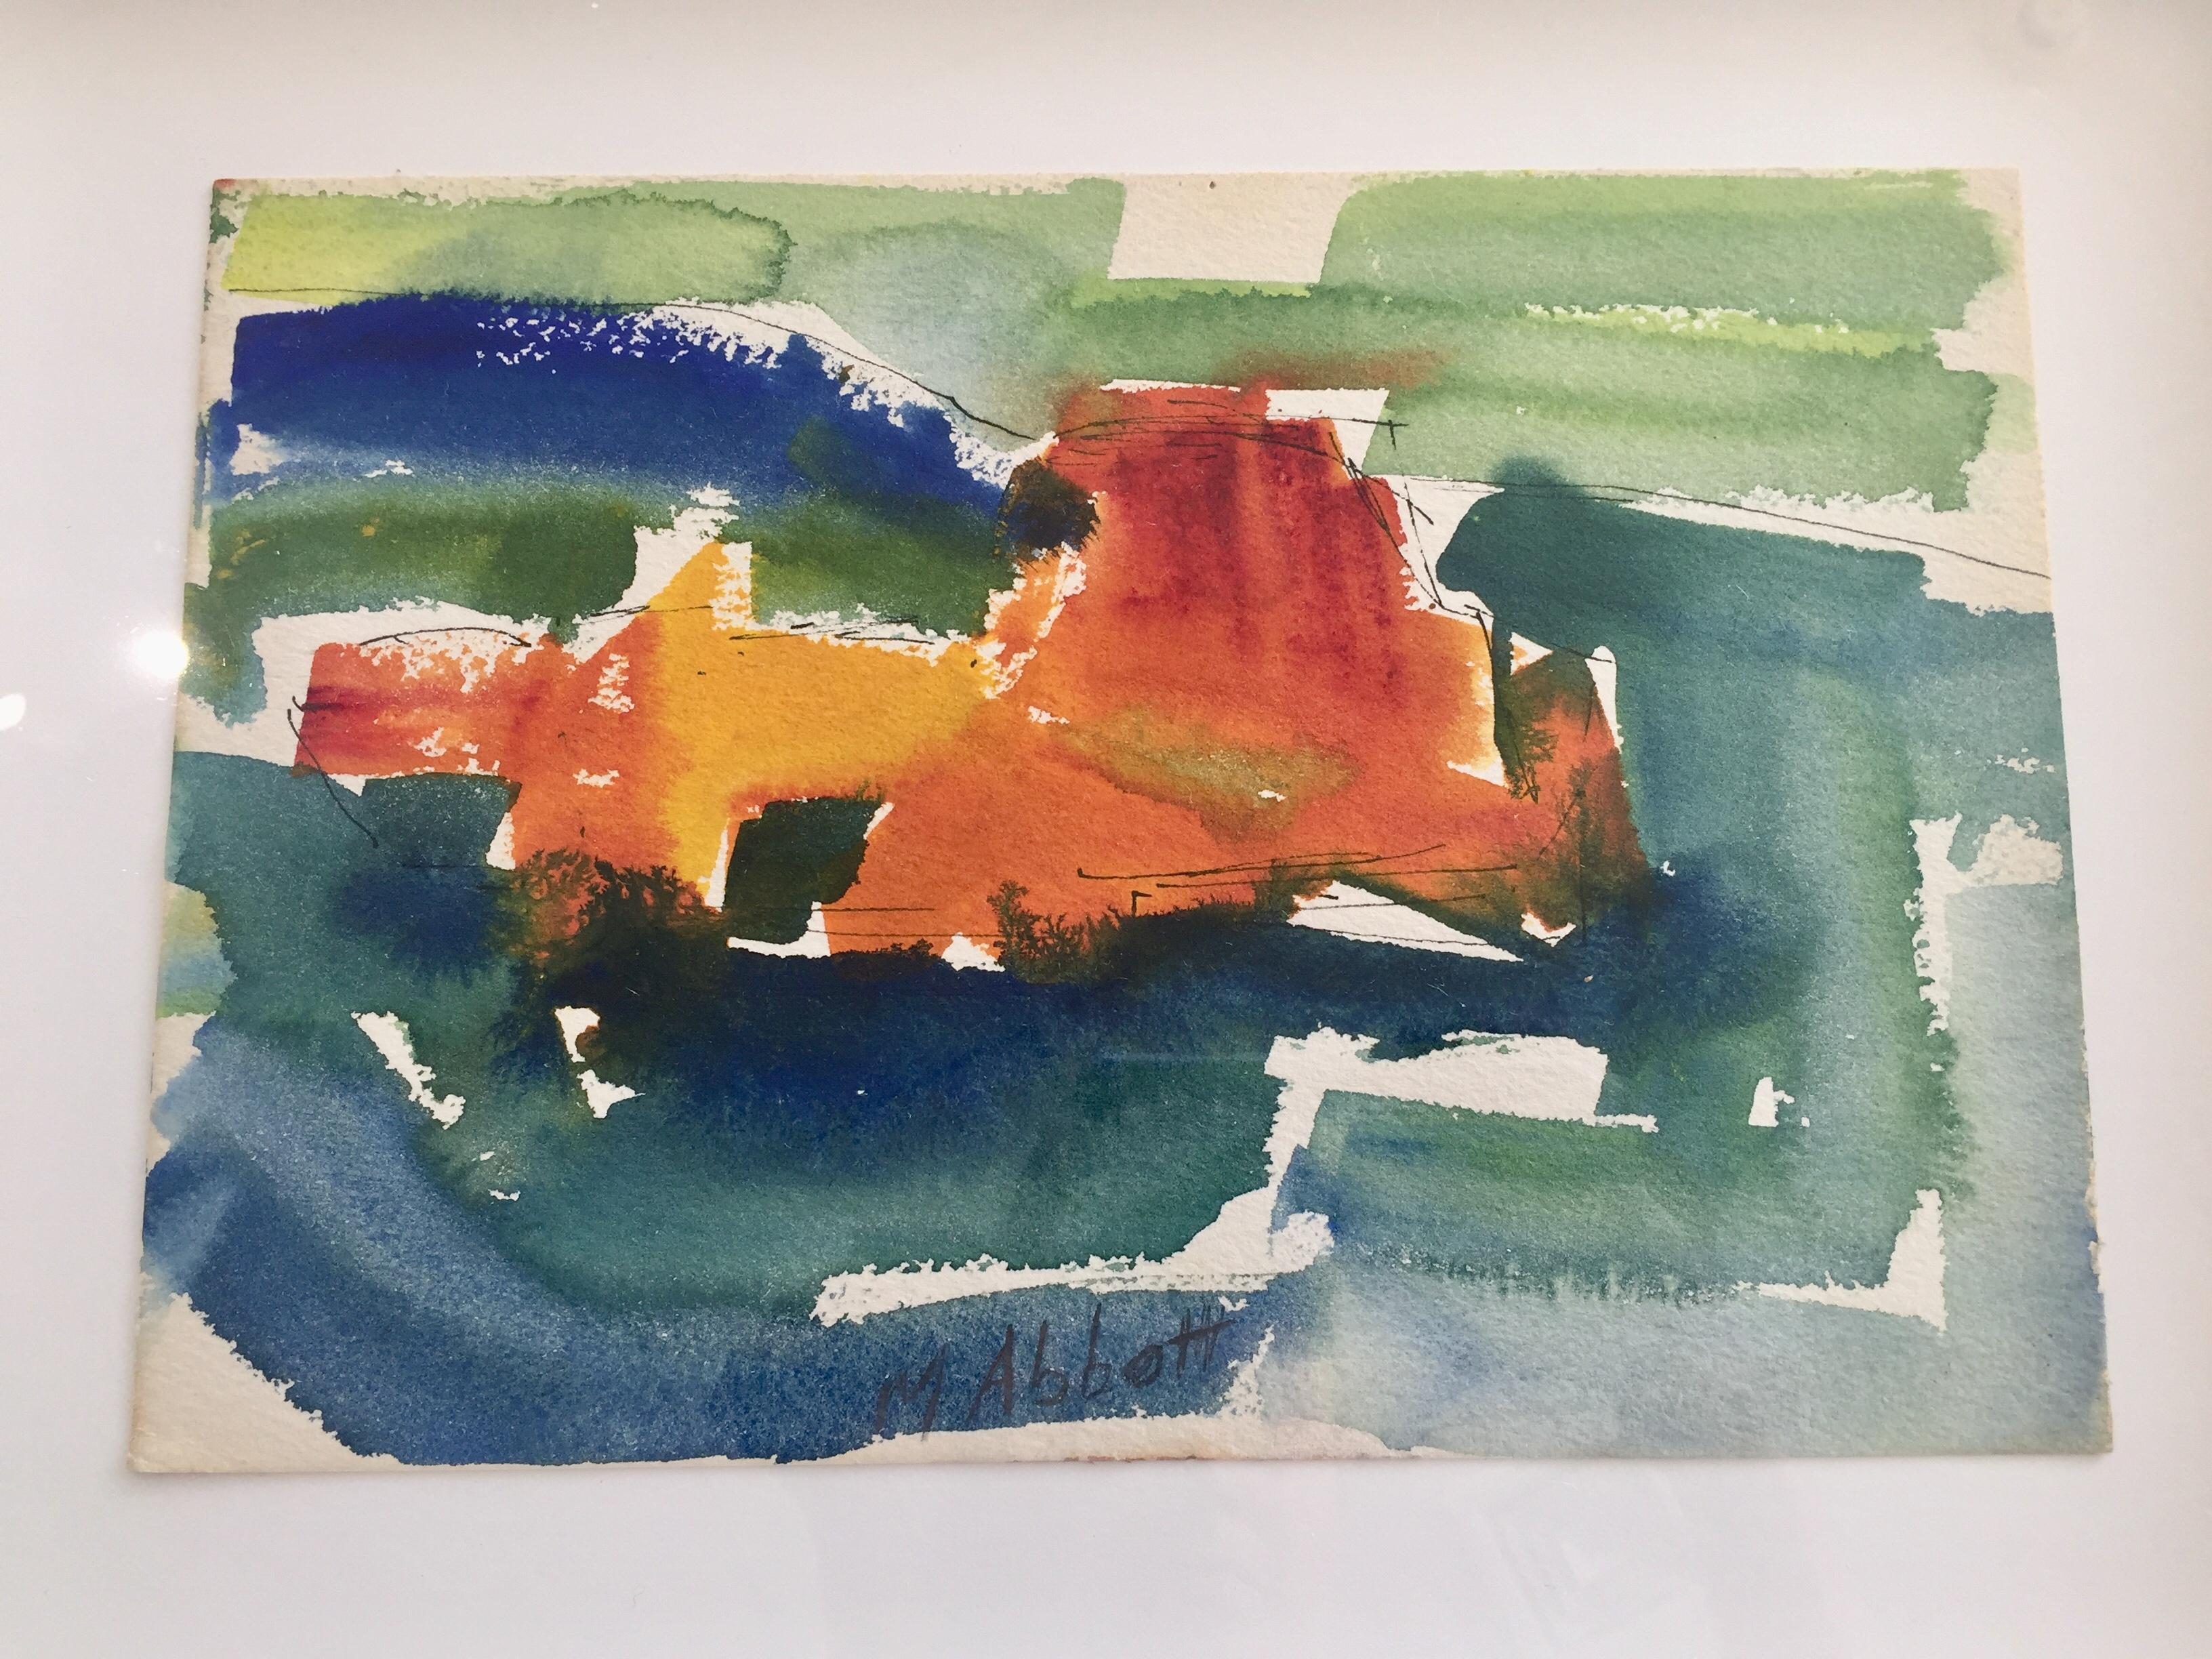 Vivid Watercolors, Bold brush strokes of Orange, Blue, and Green
Ocean Landscape Abstract Expressionism 
Female Abstract Expressionist 
Hamptons Bohemian, Artists of the East End 
H 7 x W 10 inches unframed, H 12 x W 15 inches framed 
With Mary